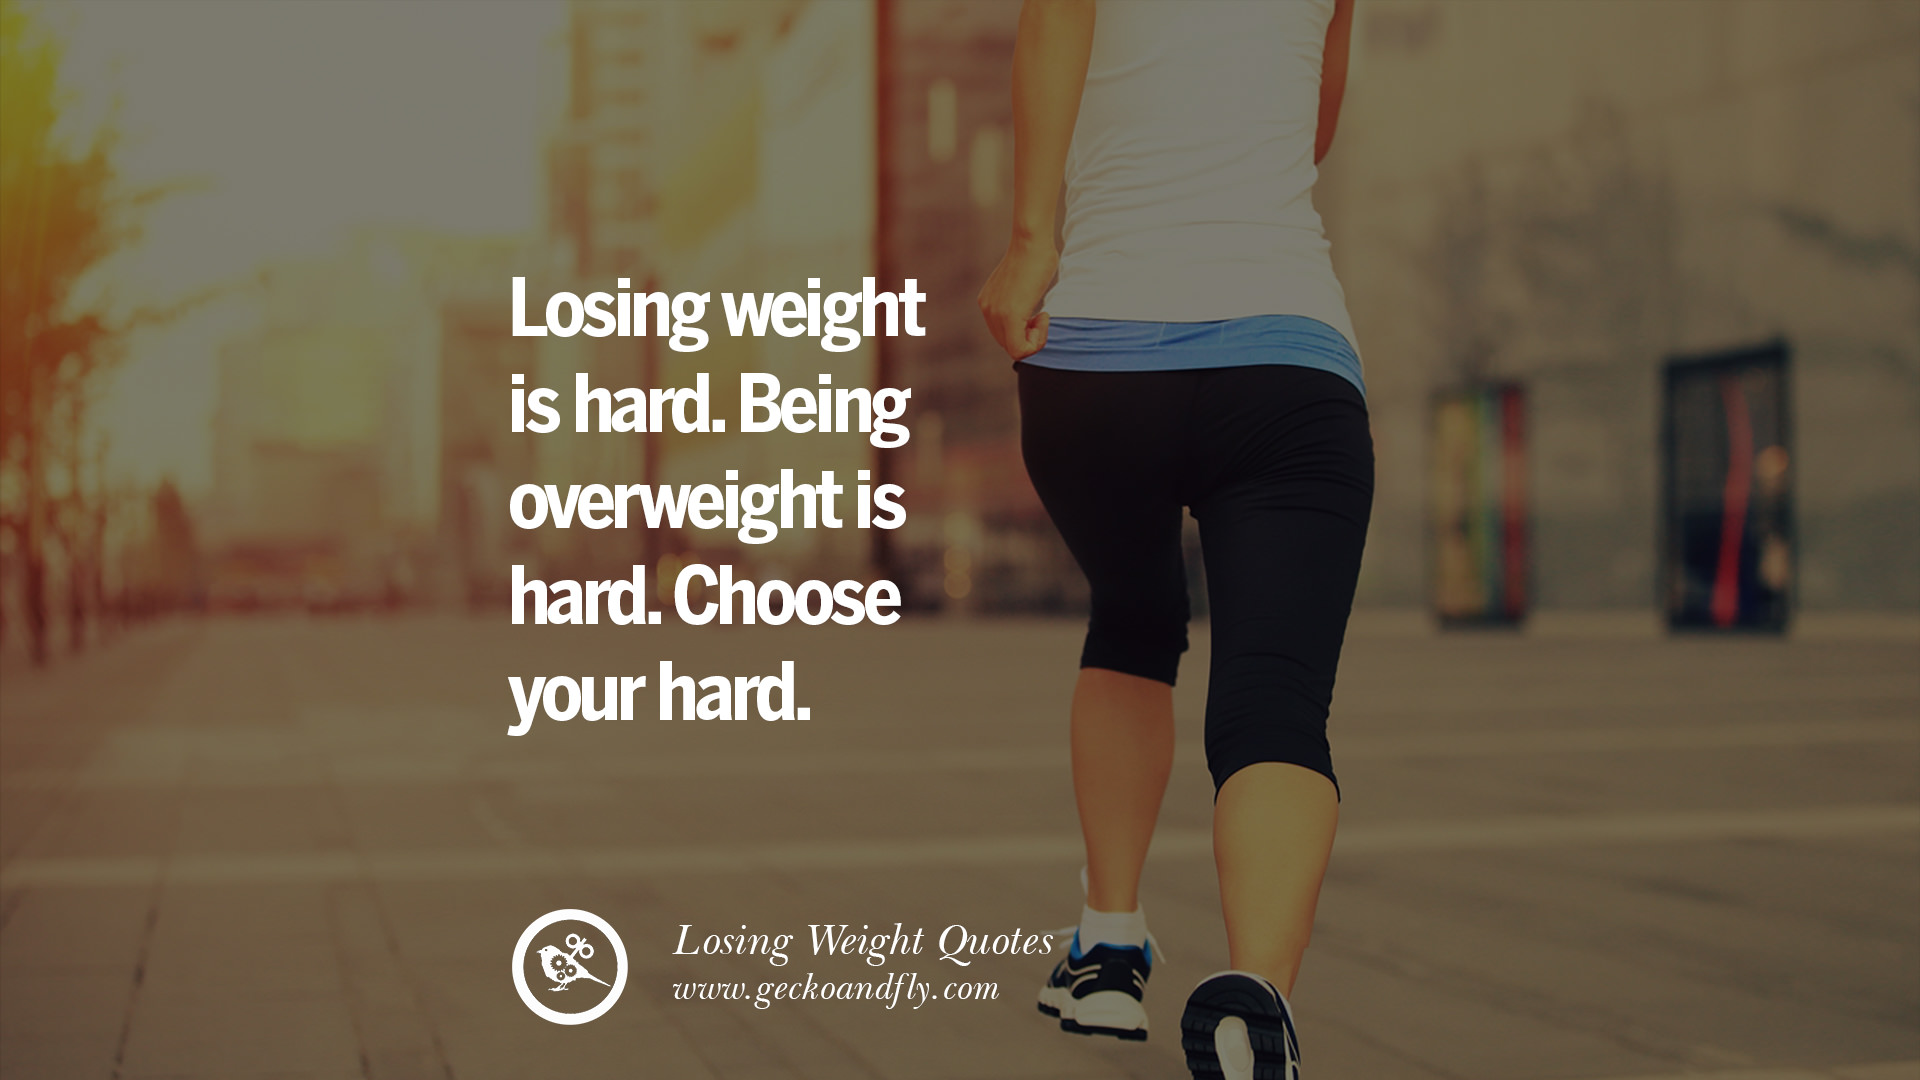 50 Motivating Quotes On Losing Weight, On Diet And Living Healthy